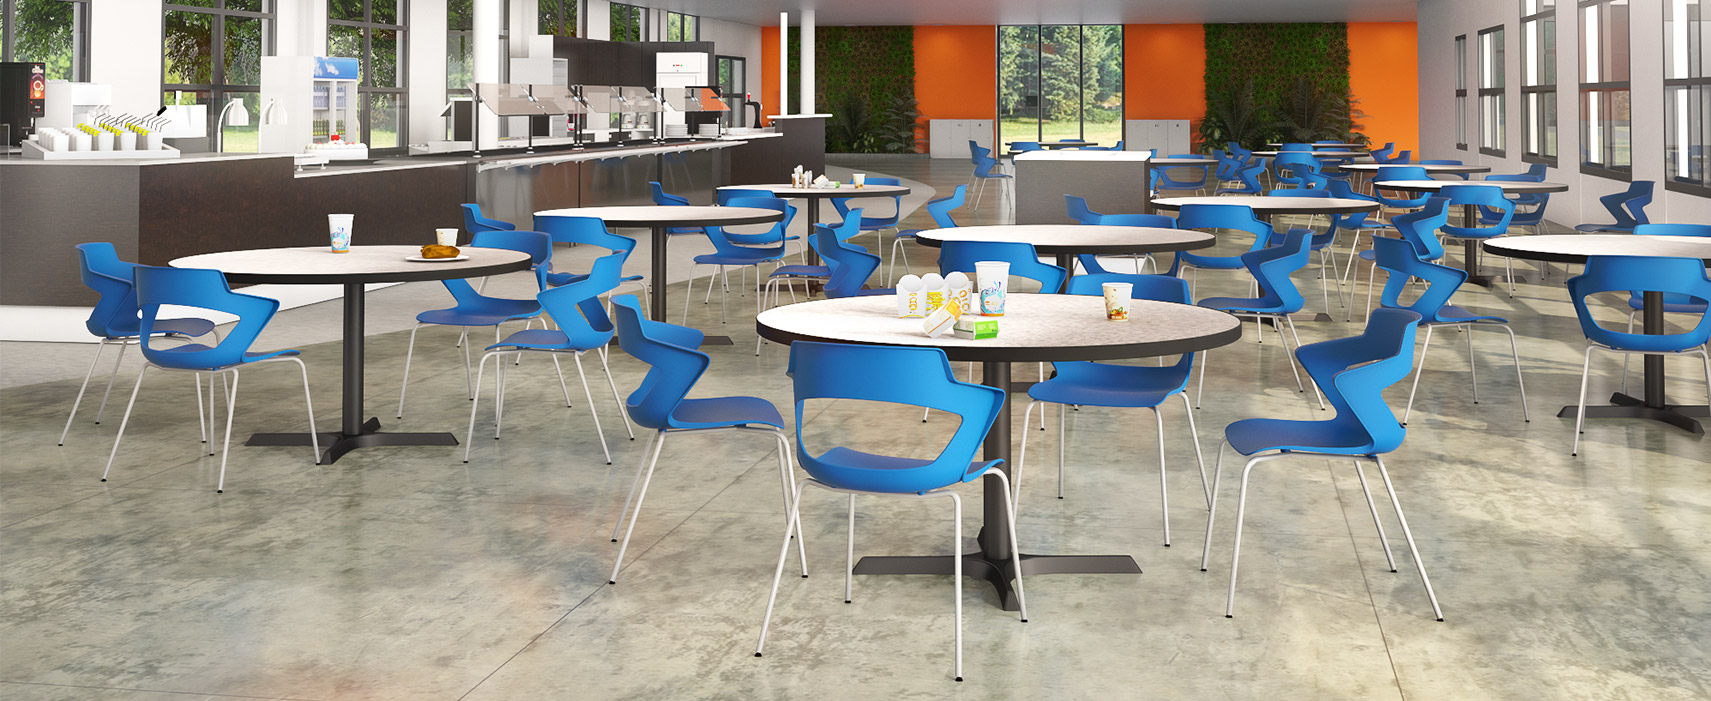 Cafeteria featuring the Zee 4-leg chairs with blue shell. 